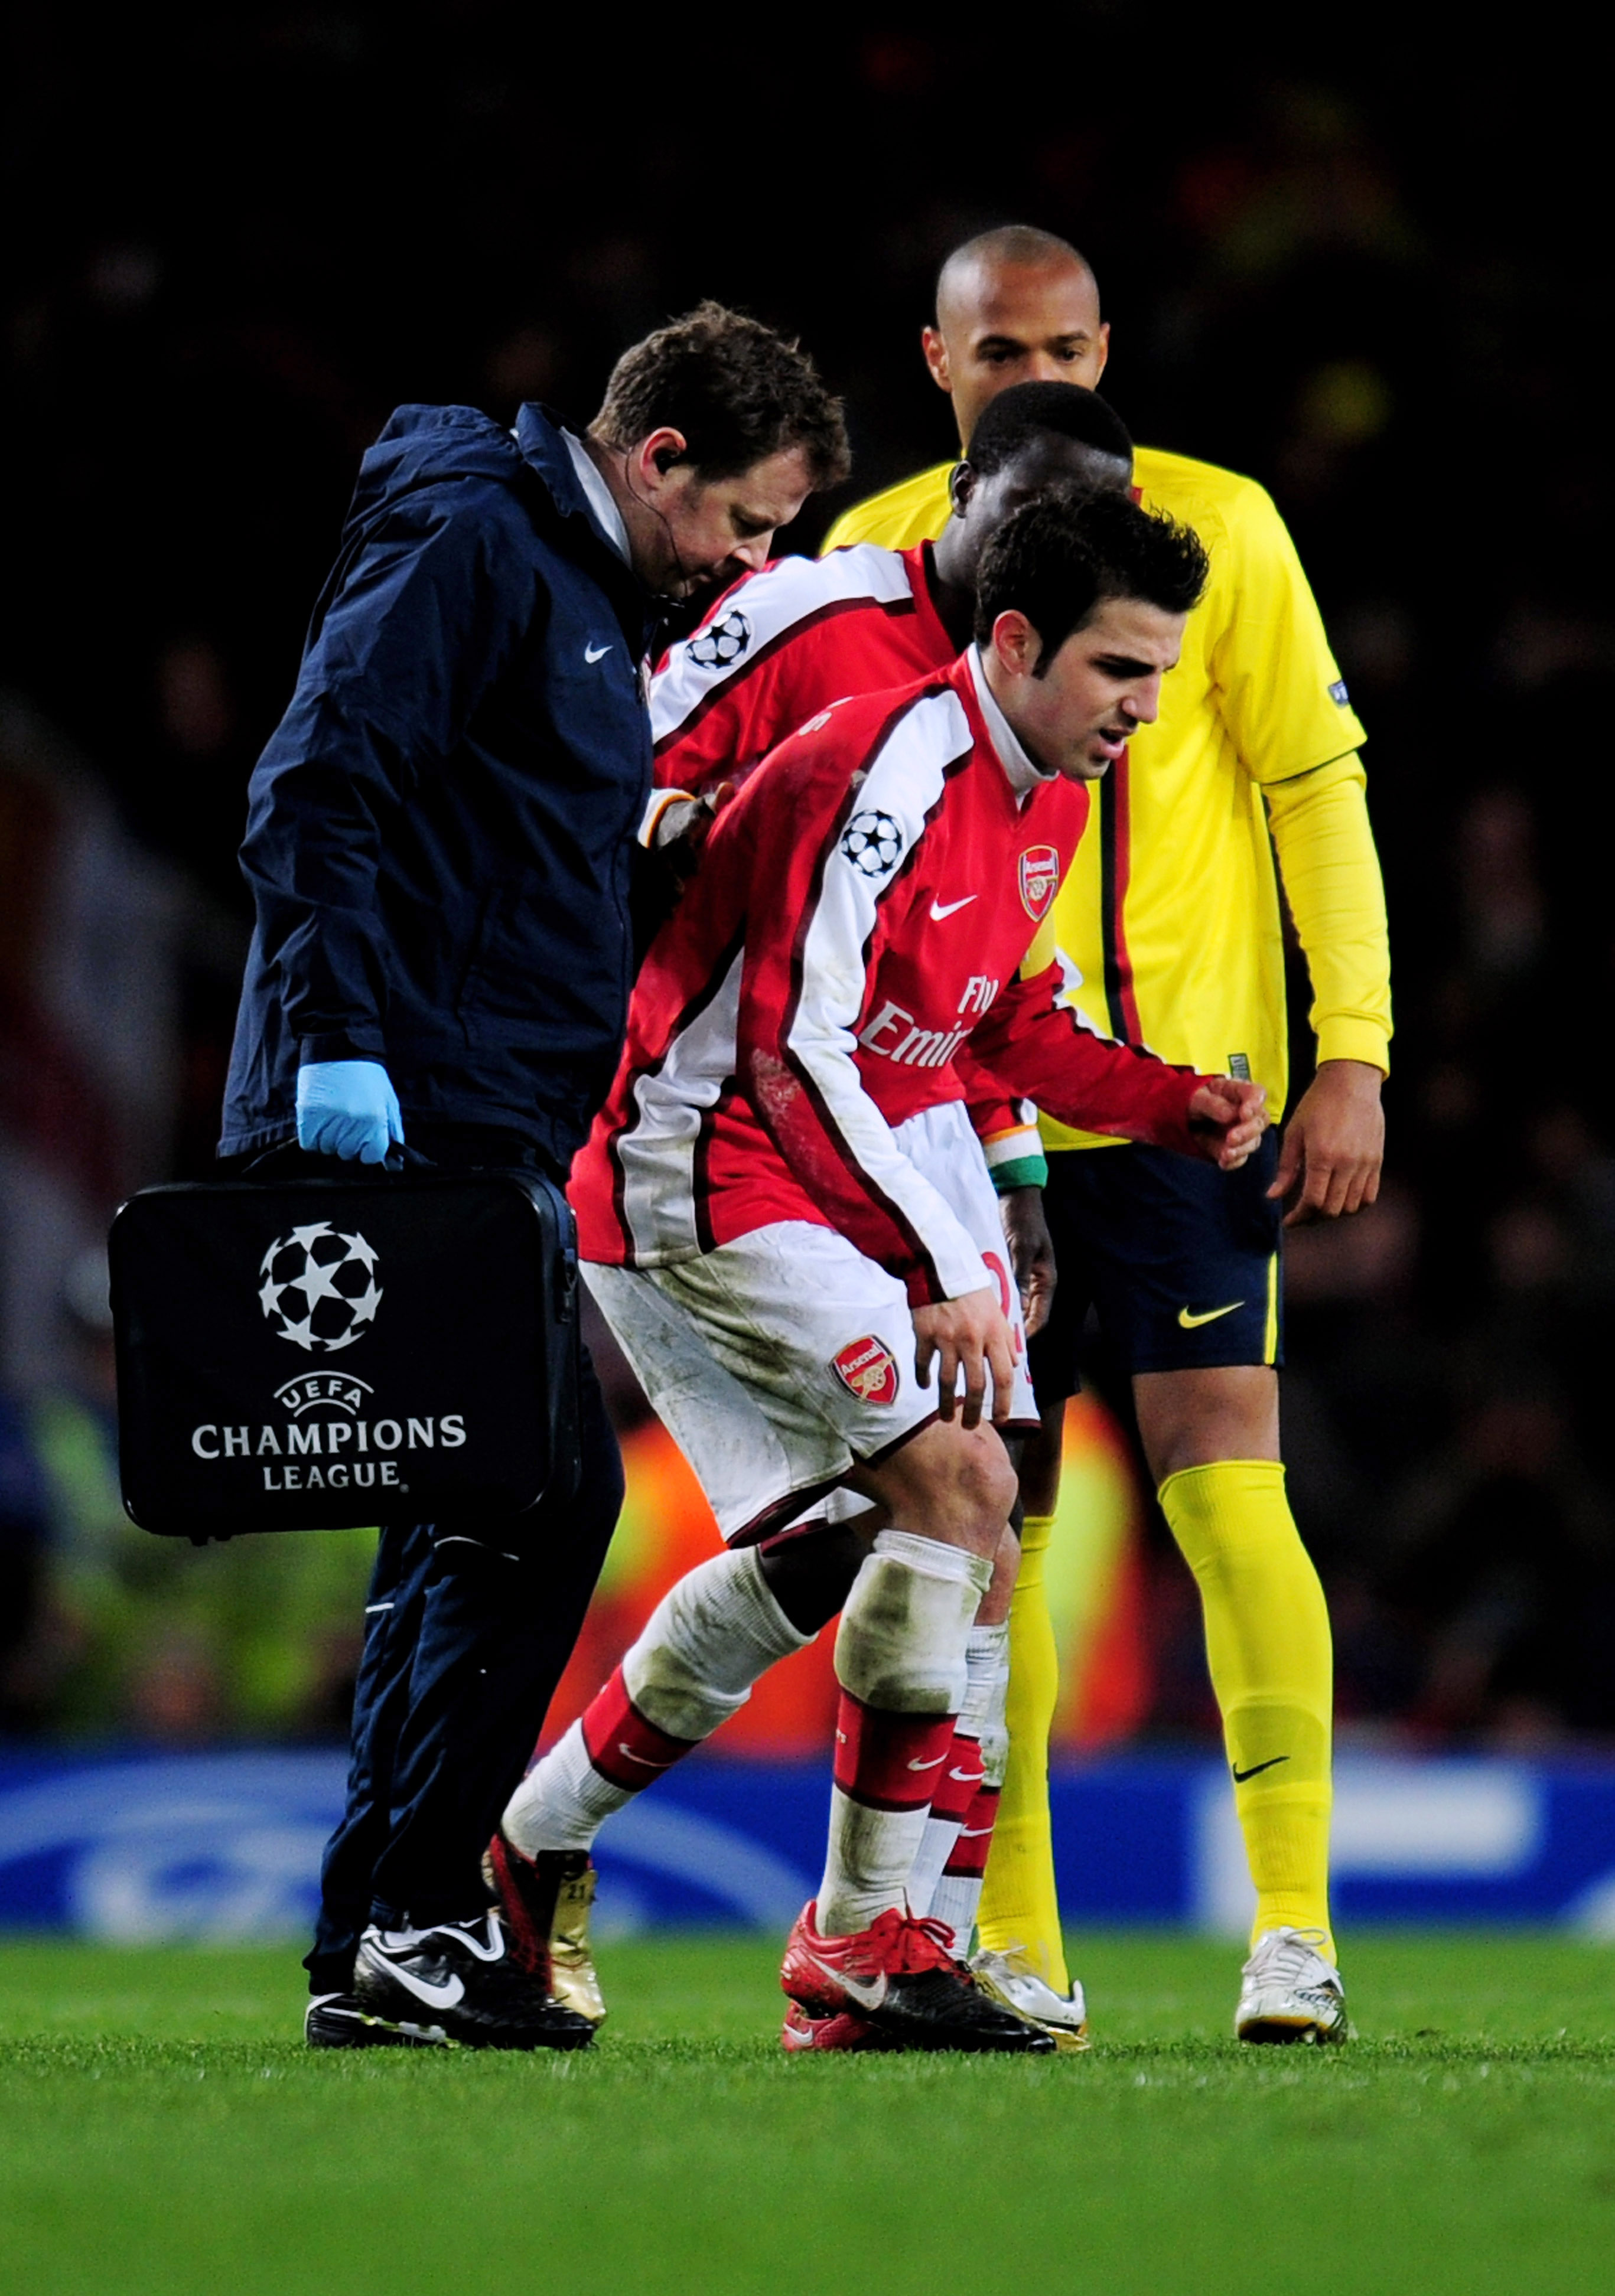 LONDON, ENGLAND - MARCH 31:  Cesc Fabregas of Arsenal hobbles off the pitch injured to receive treatment after levelling the scores at 2-2 from the penalty spot during the UEFA Champions League quarter final first leg match between Arsenal and FC Barcelon